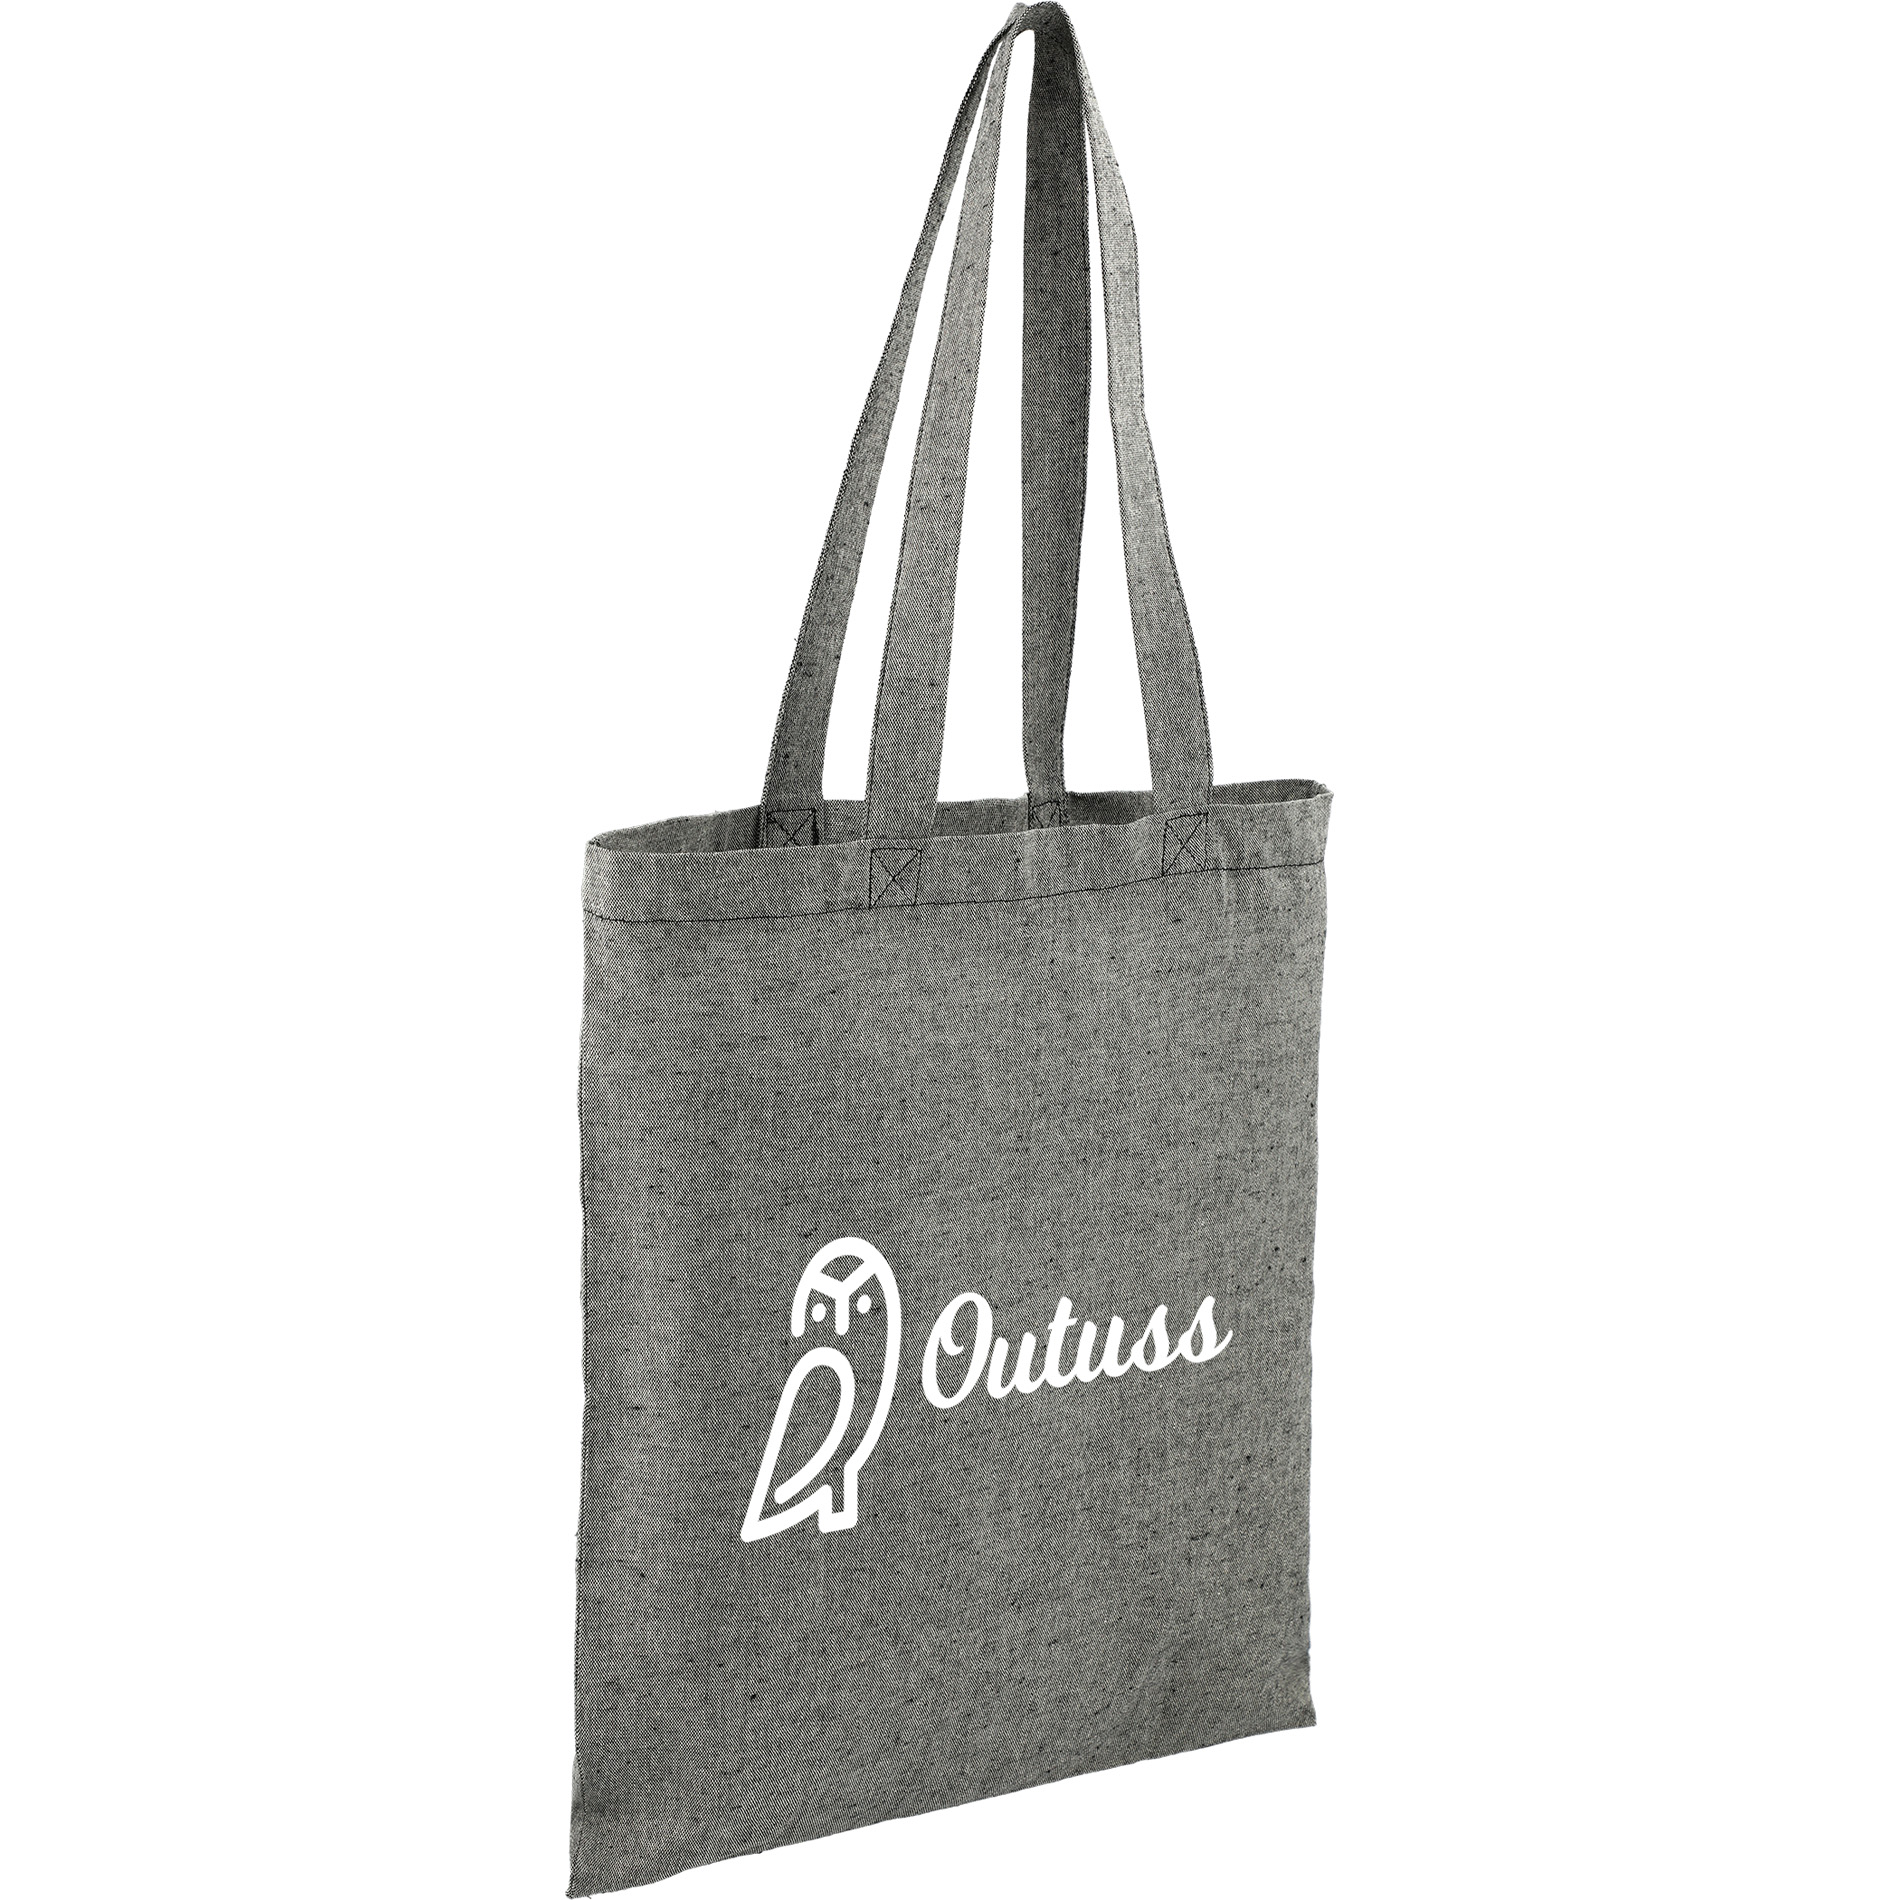 Recycled cotton tote bag custom black